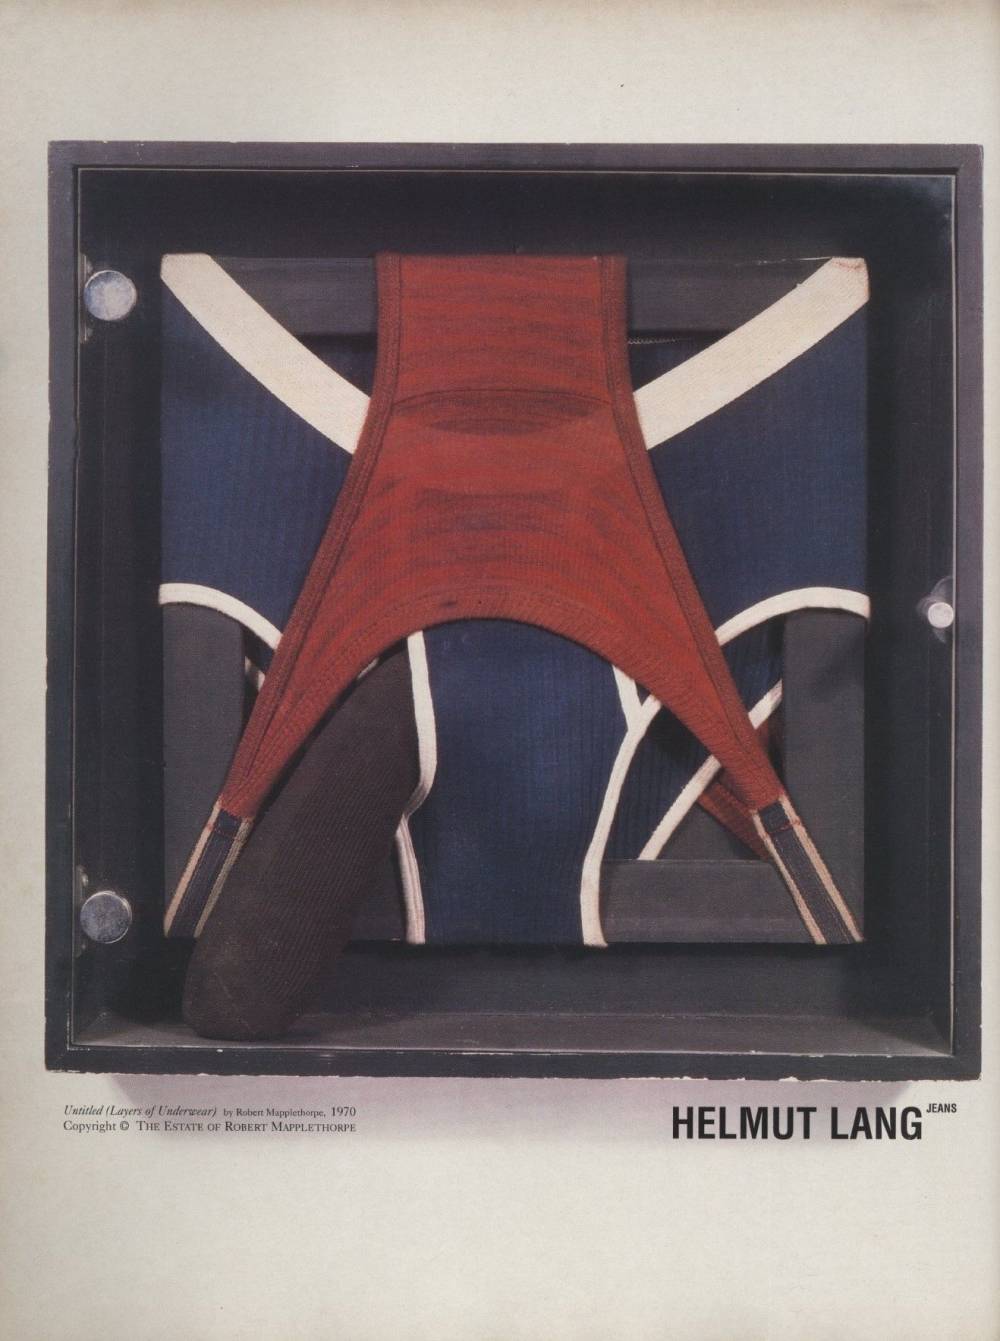  Helmut Lang, Jeans Ad Campaign  , Untitled (Layers of Underwear), Robert Mapplethorpe, 1970 